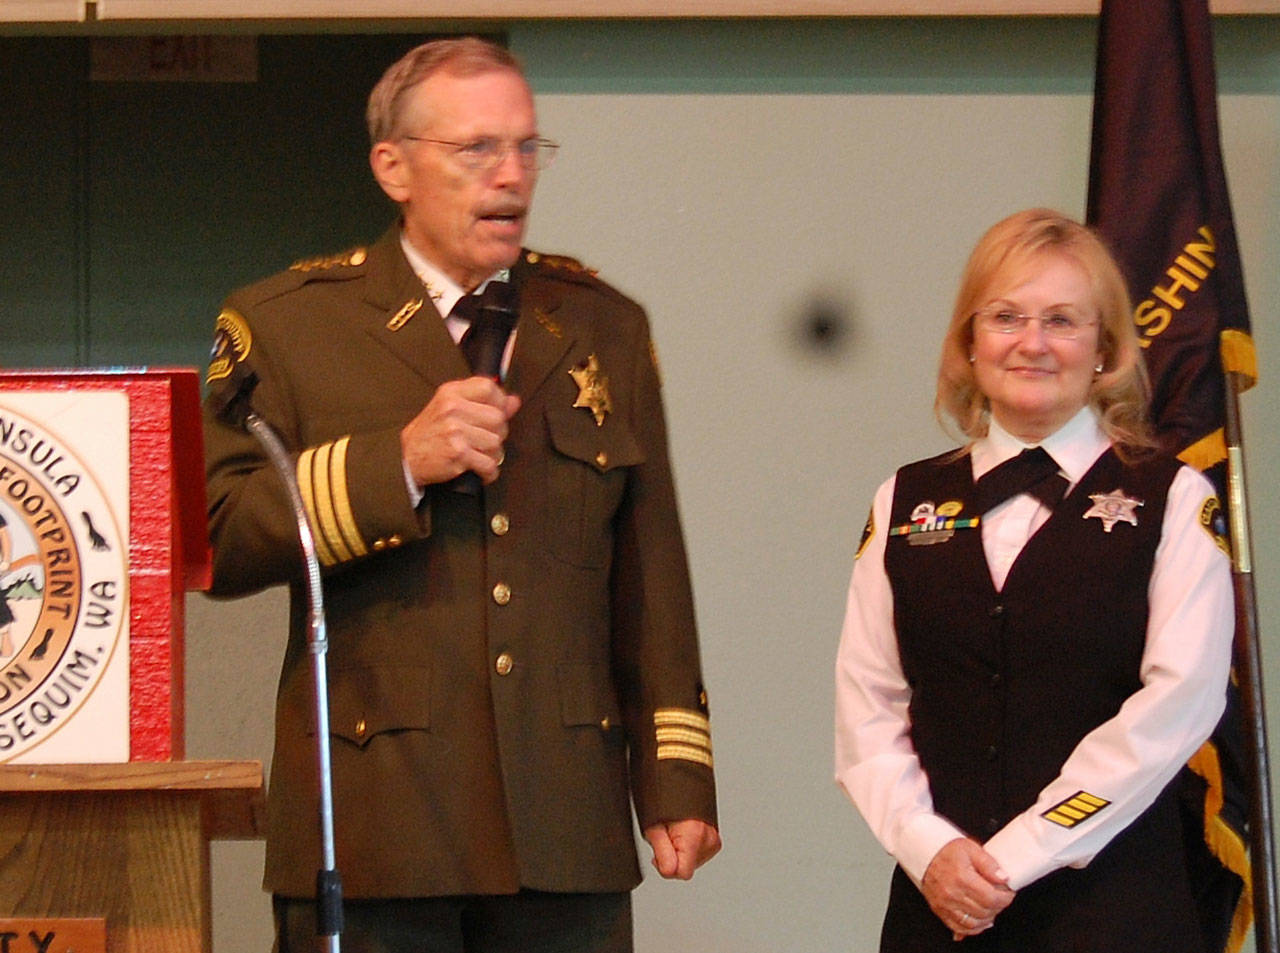 Clallam County Sheriff Bill Benedict congratulates Sylvia Orth, Footprinters of Olympic Peninsula Chapter 74’s 2018 Officer of the Year. Submitted photo                                Clallam County Sheriff Bill Benedict congratulates Sylvia Orth, Footprinters of Olympic Peninsula Chapter 74’s 2018 Officer of the Year.